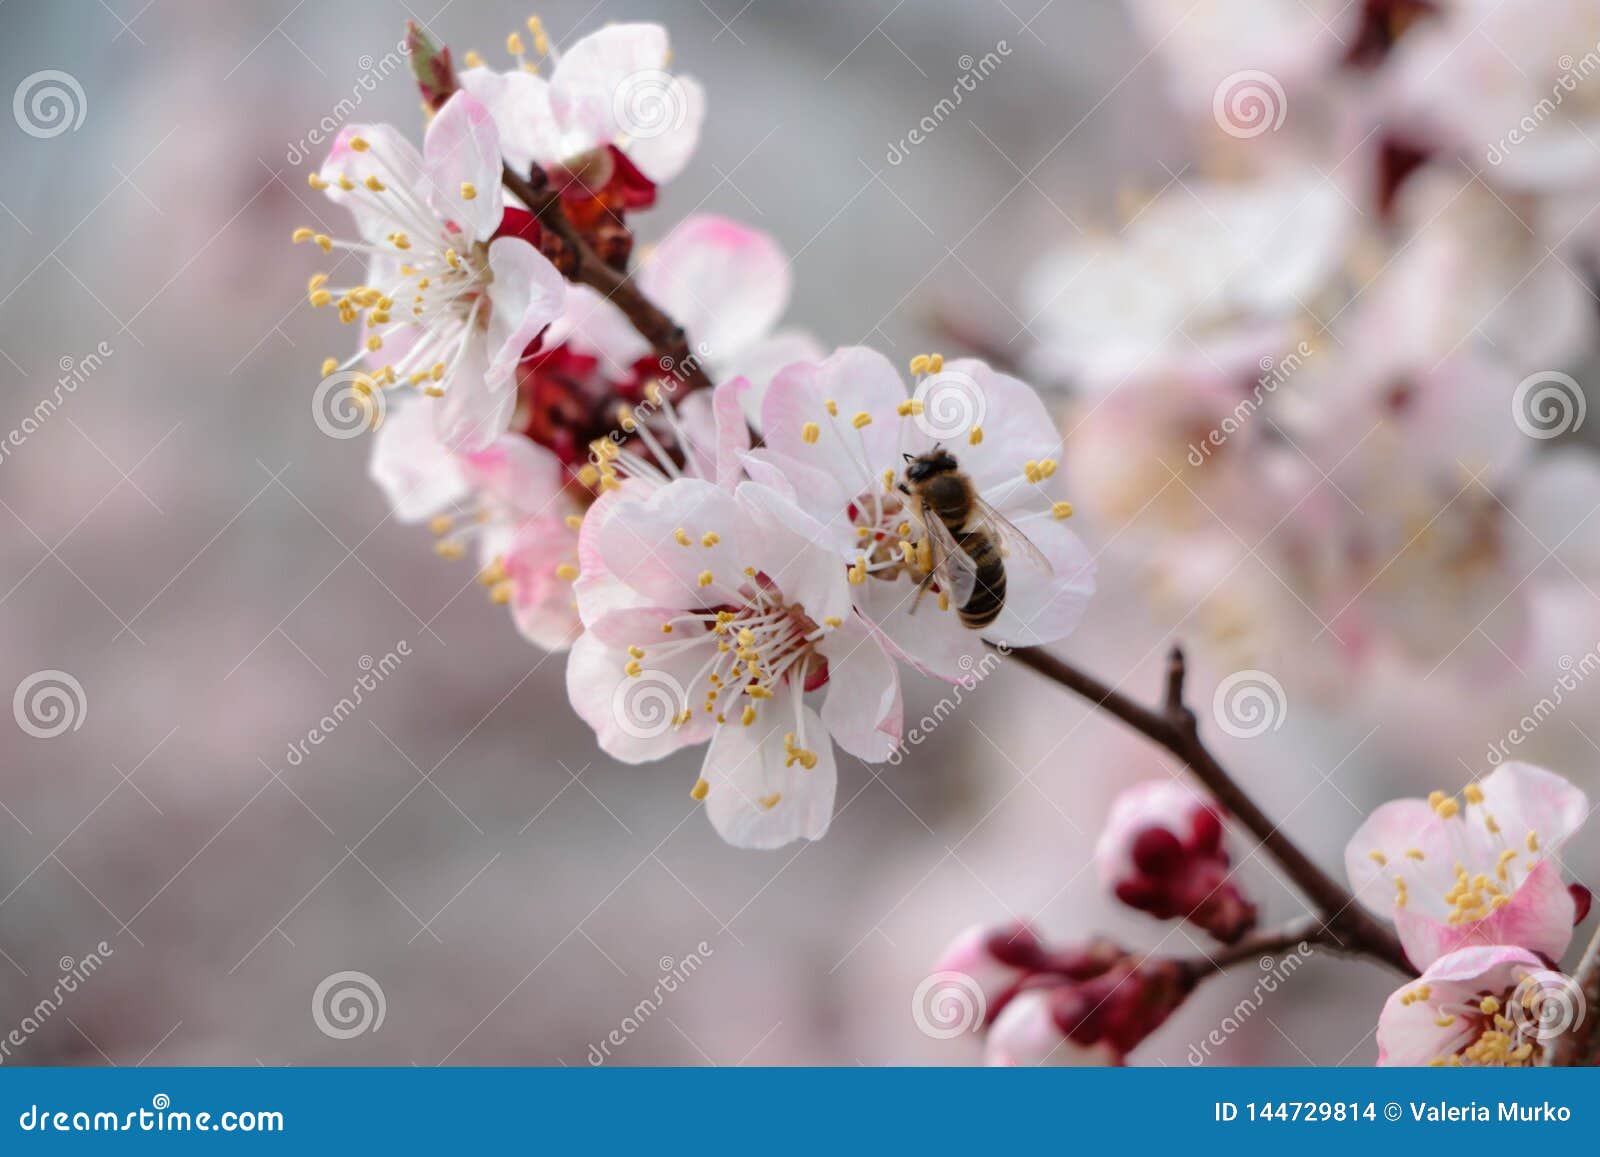 Apricot Flower Flowering Apricot Spring Flowers Blurred Background Pink And White Flowers Warm Spring Background Stock Photo Image Of Blossom Nature 144729814